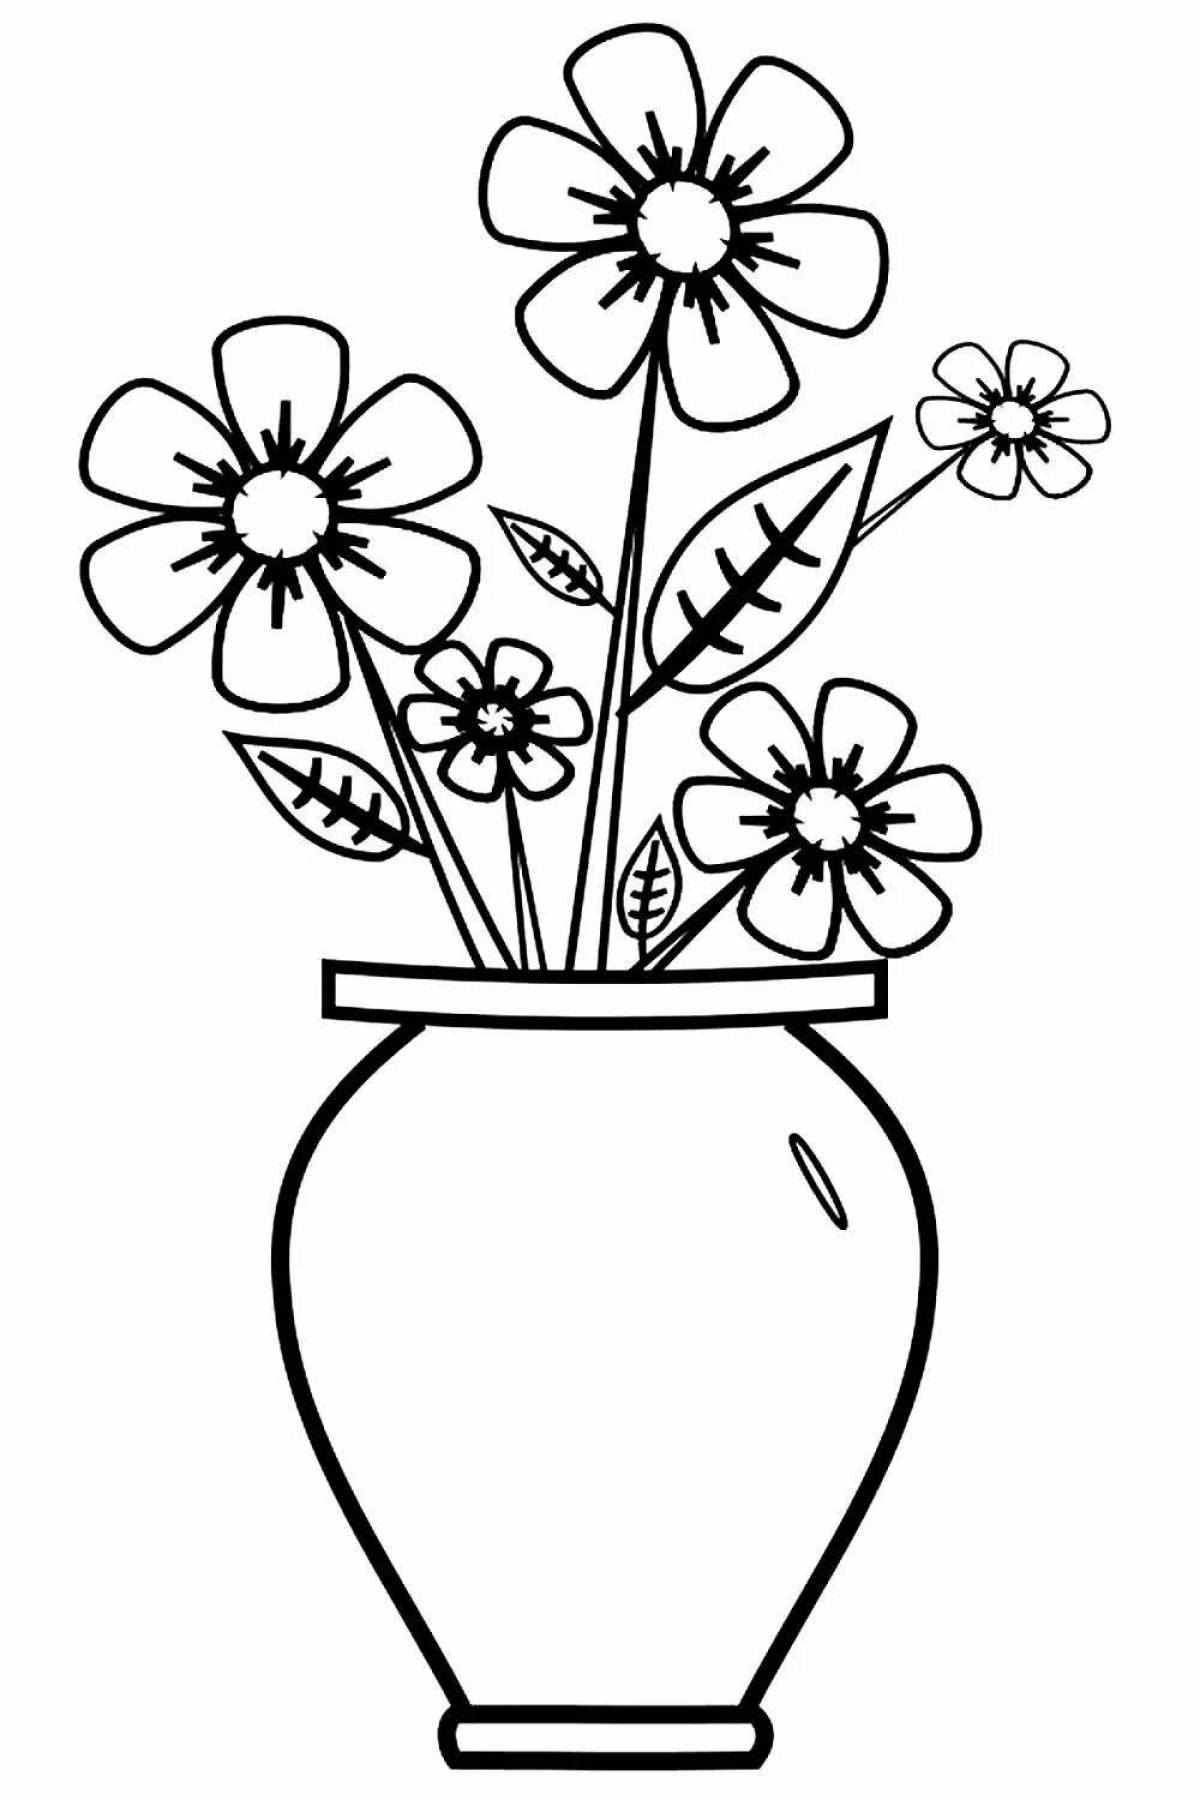 Coloring inspiration flowers in a vase